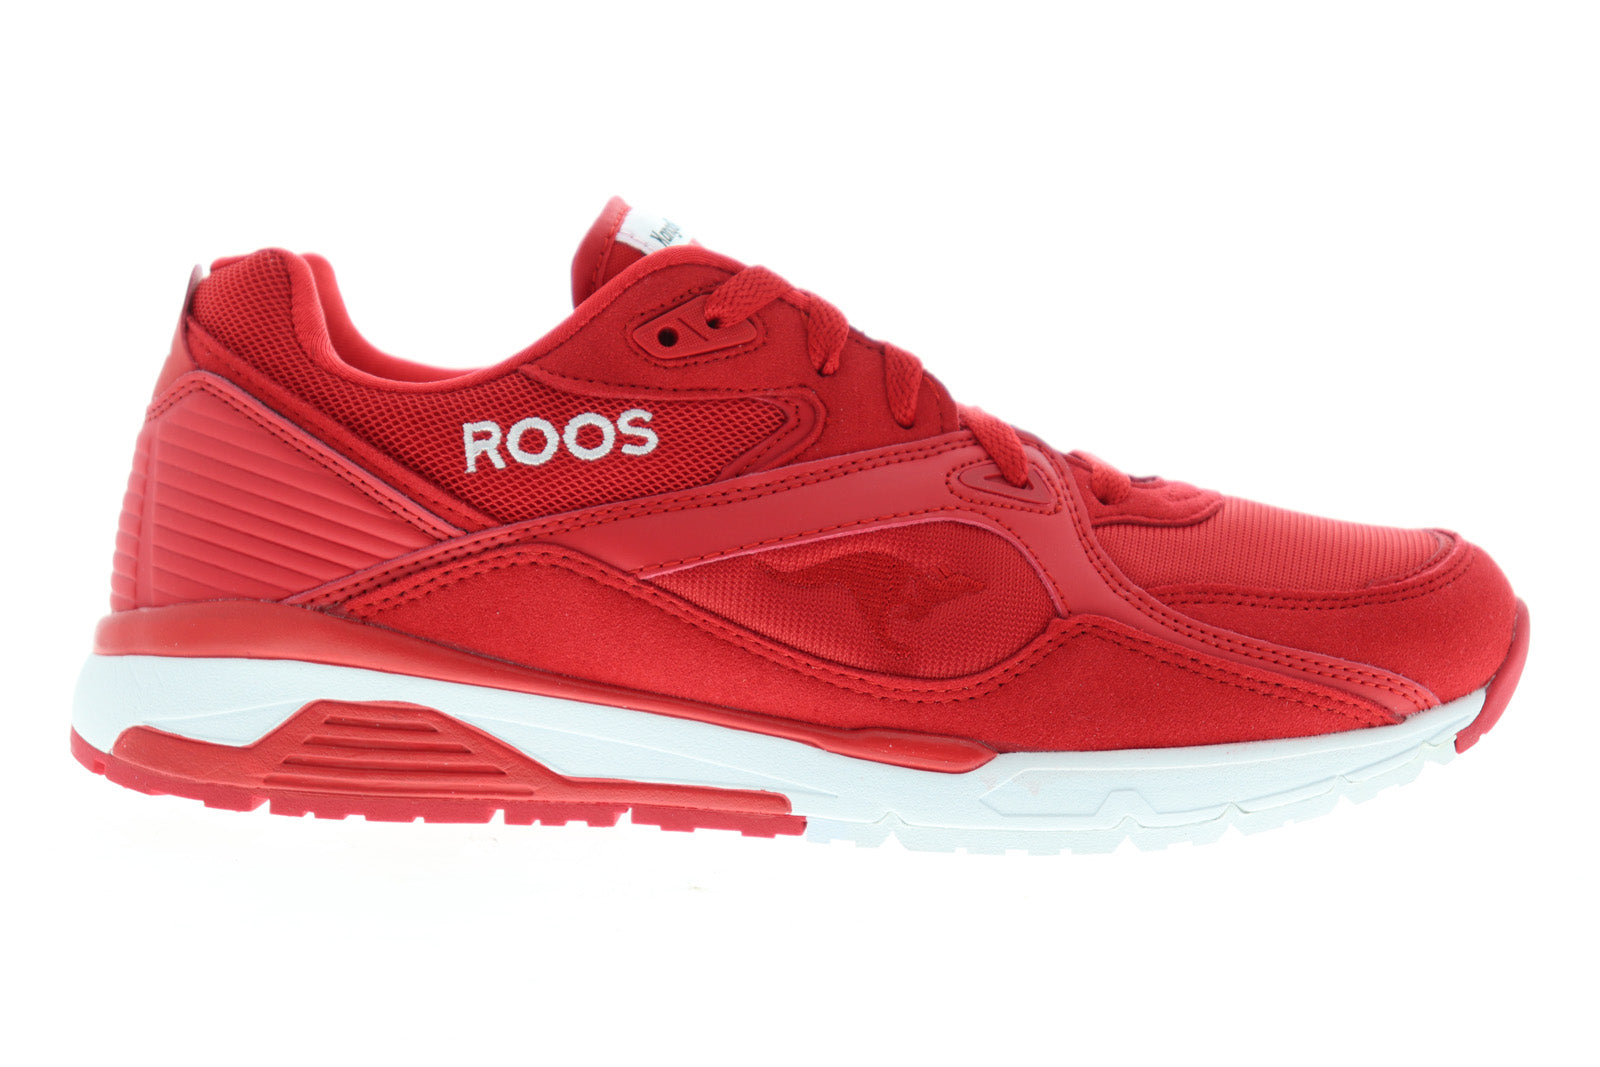 Roos Runaway 1CM00509-611 Mens Red Synthetic Sneakers Shoes 10.5 Shoes